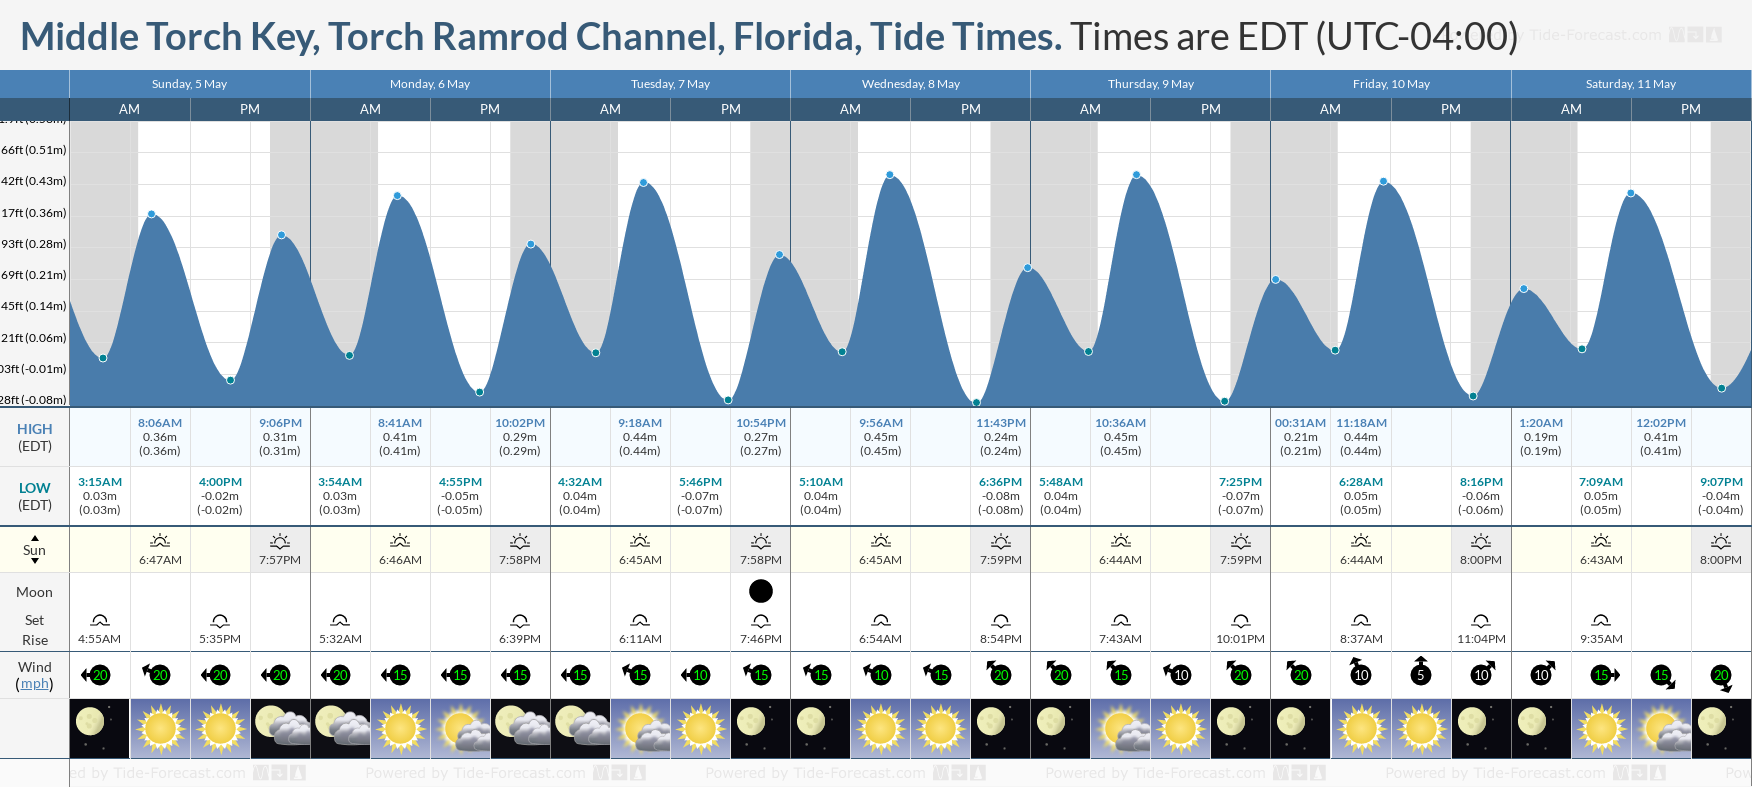 Middle Torch Key, Torch Ramrod Channel, Florida Tide Chart including high and low tide tide times for the next 7 days